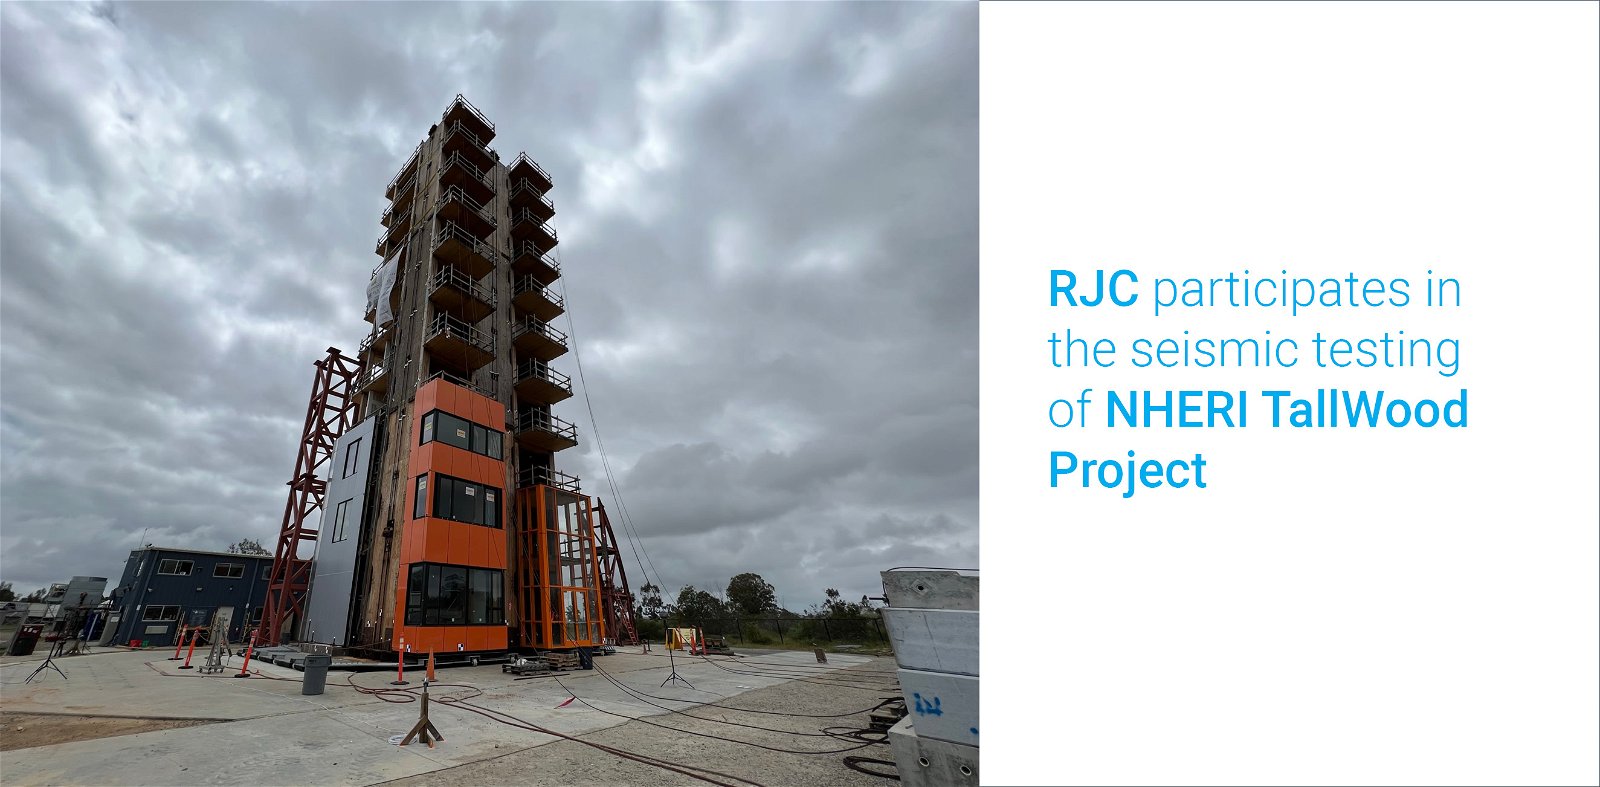 RJC Engineers to Support First-of-its-Kind Seismic Testing of NHERI TallWood Project